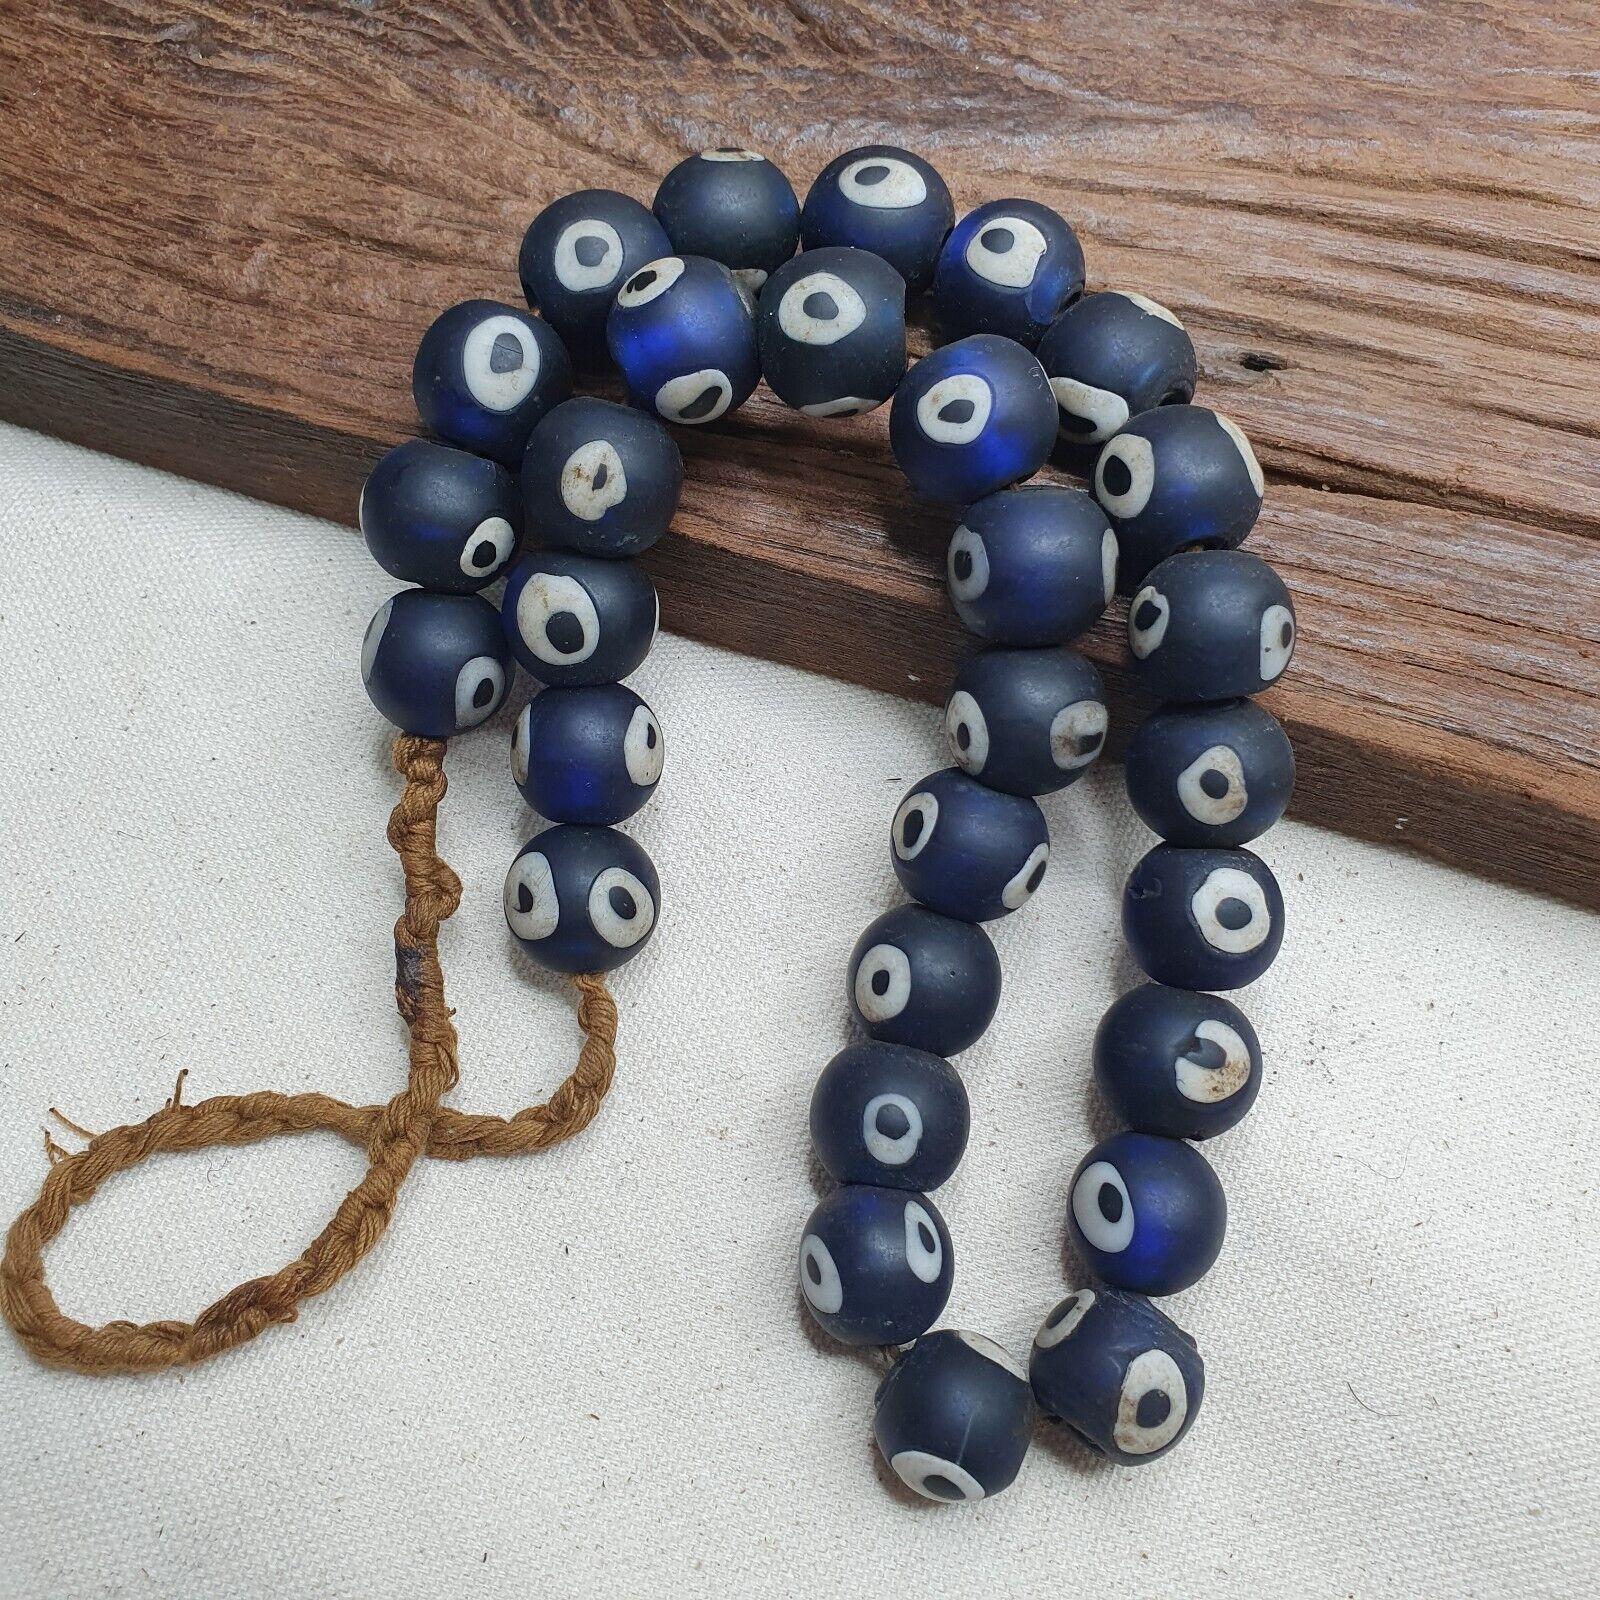 Amazing Vintage Evil-Eye old venetian-African Style Glass beads Strand 18-19mm